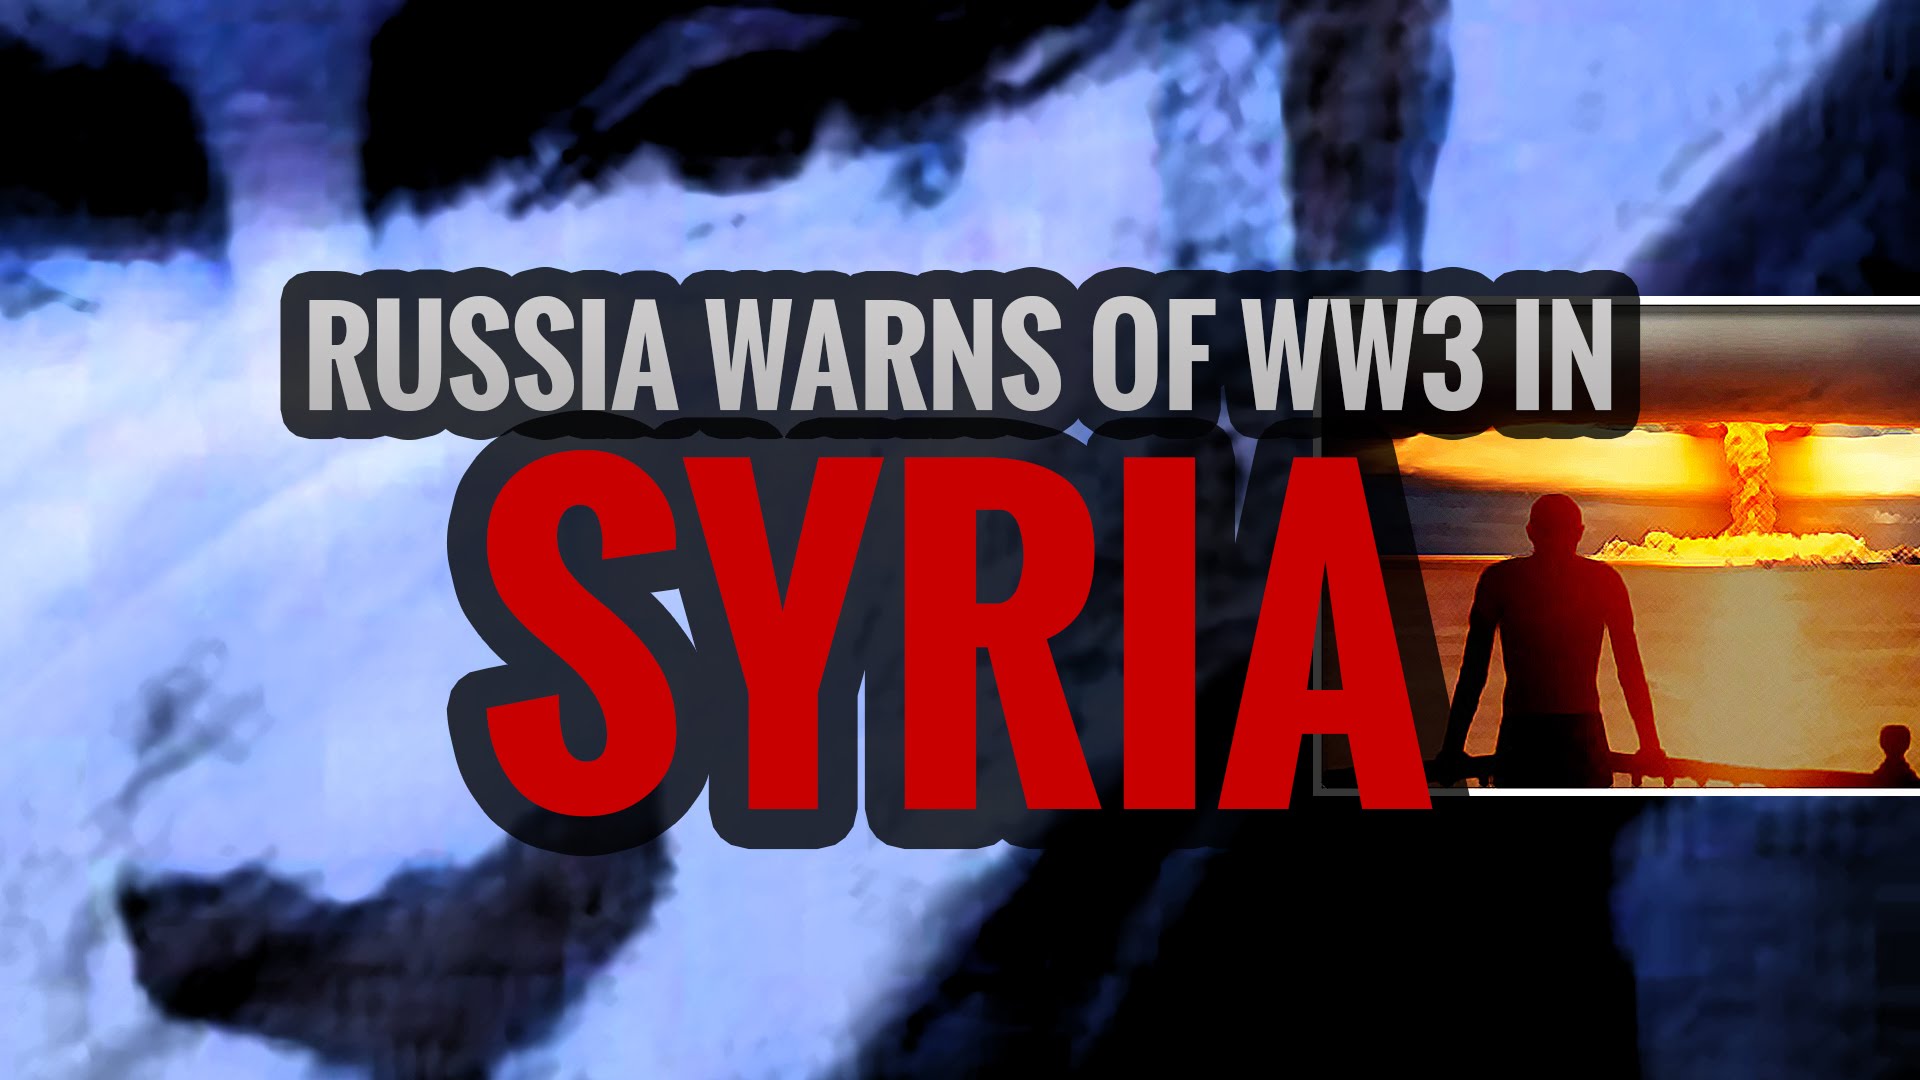 Russia Warns of WW3 in Syria